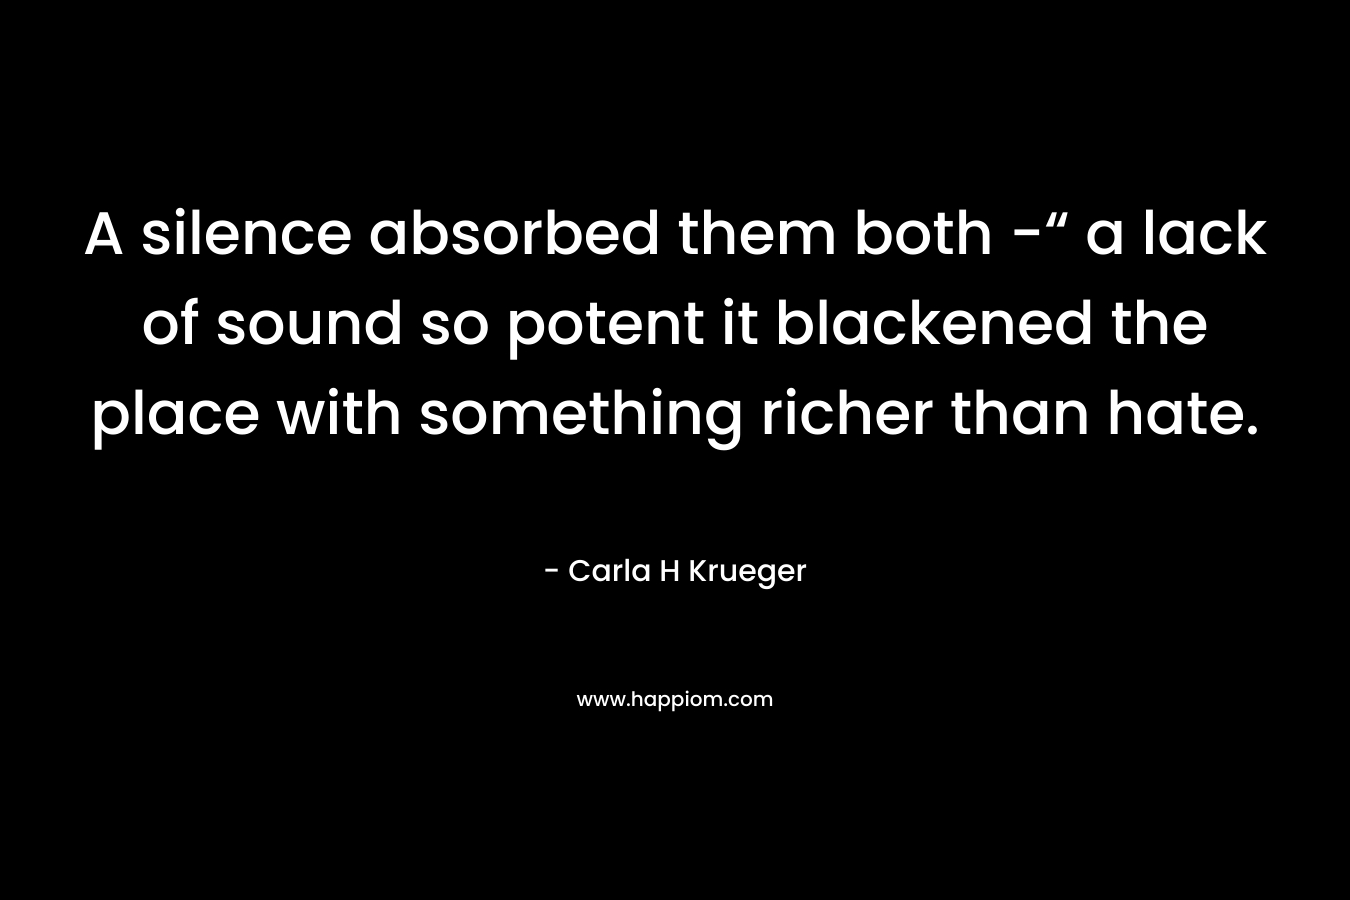 A silence absorbed them both -“ a lack of sound so potent it blackened the place with something richer than hate. – Carla H Krueger